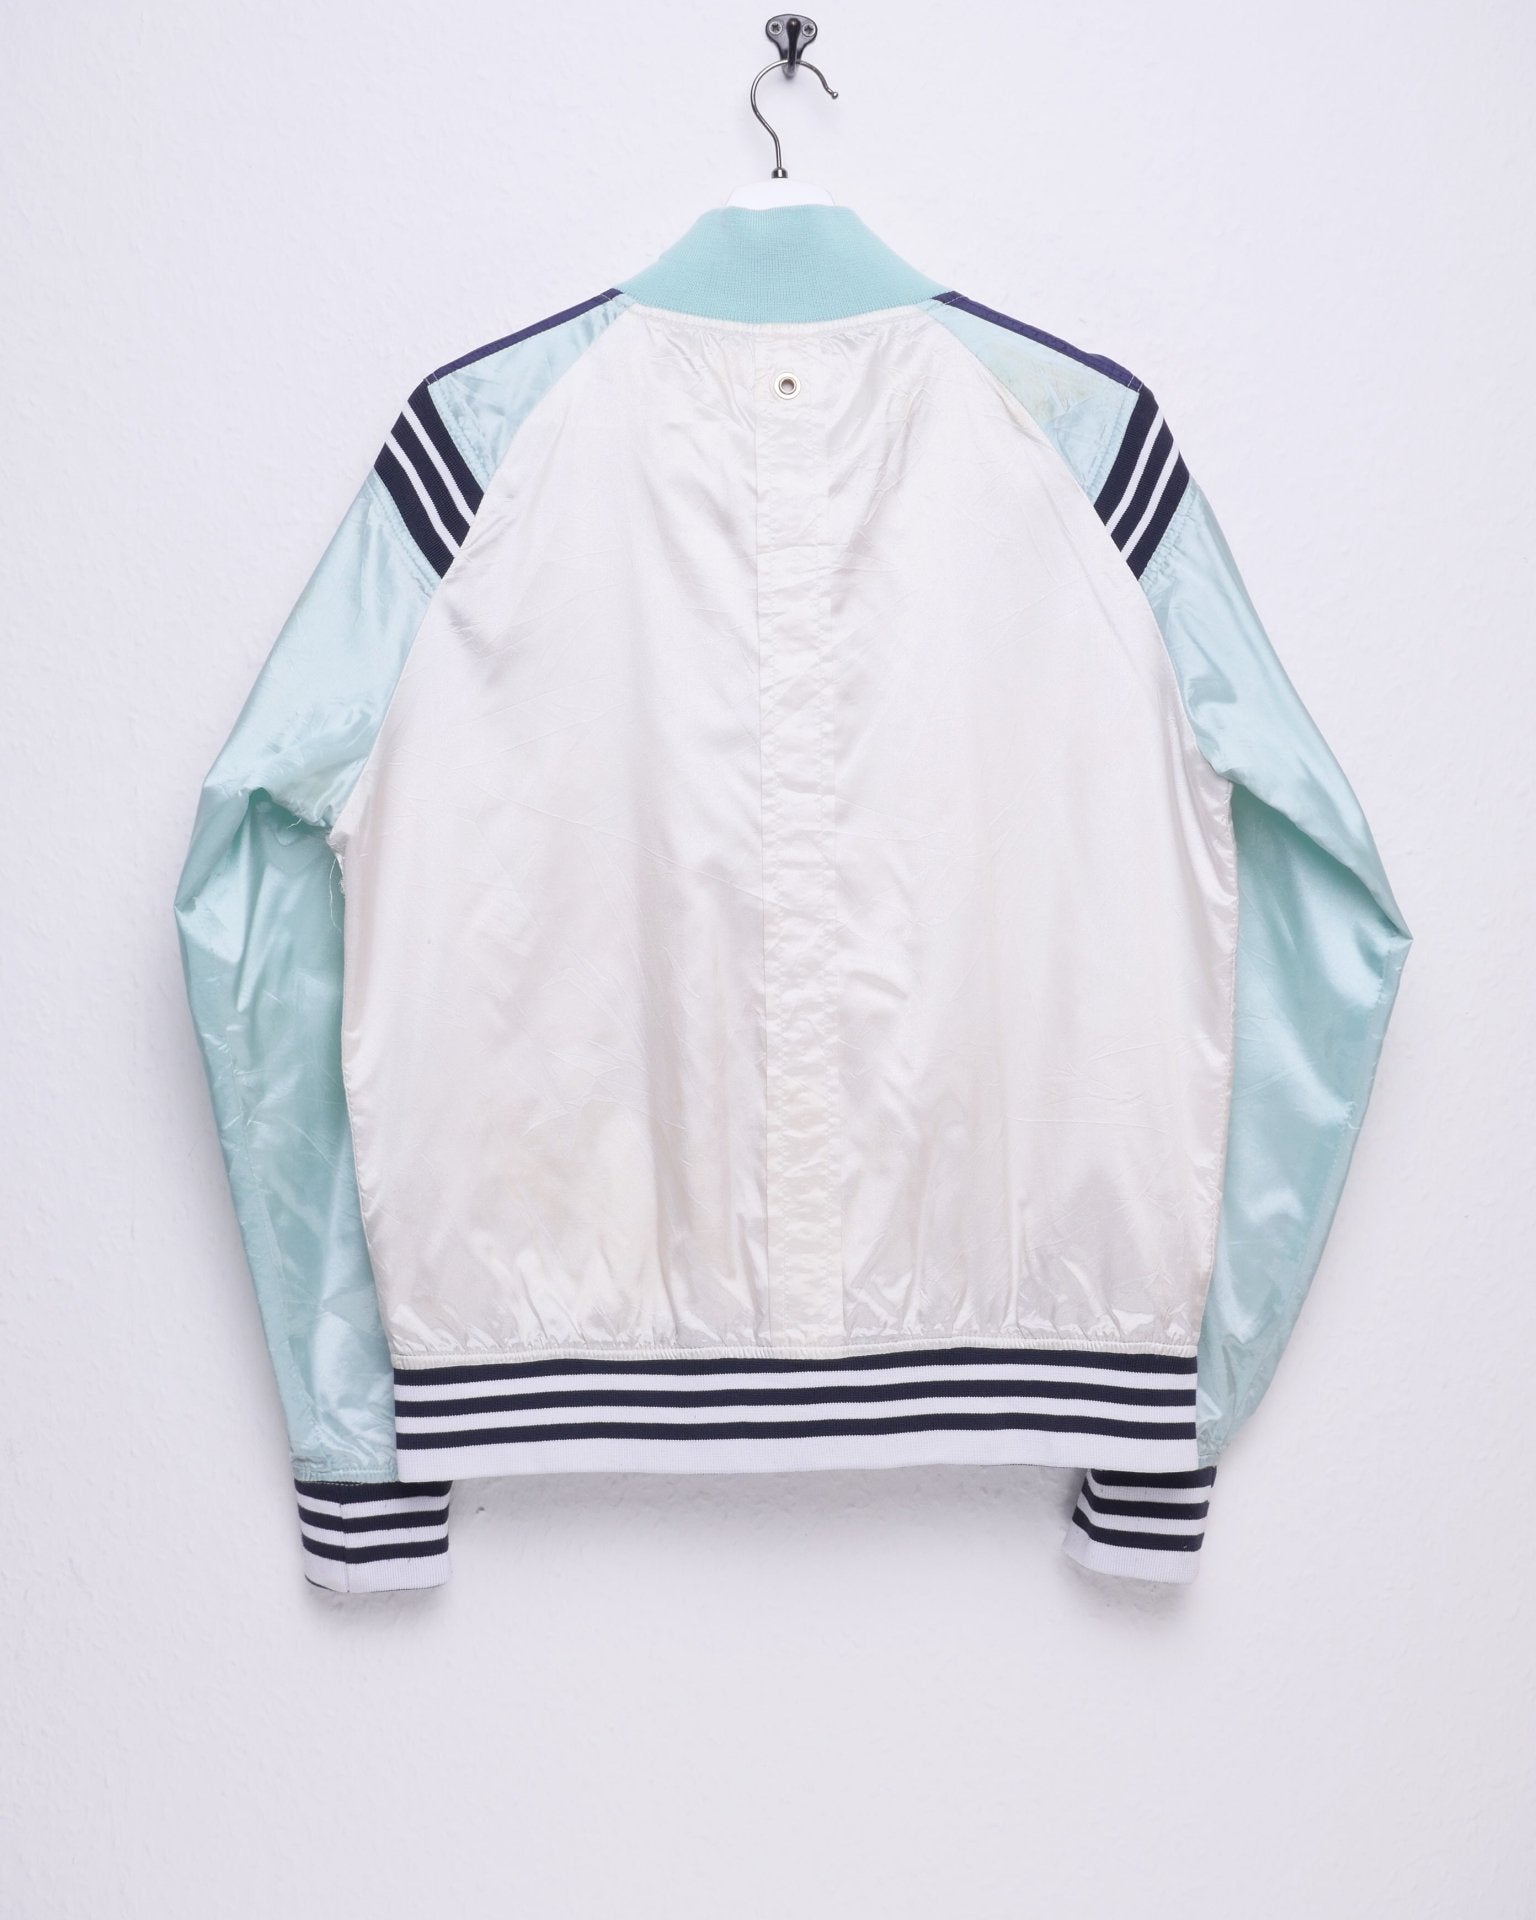 'Newstorm' embroidered Spellout three toned Vintage Track Jacket - Peeces